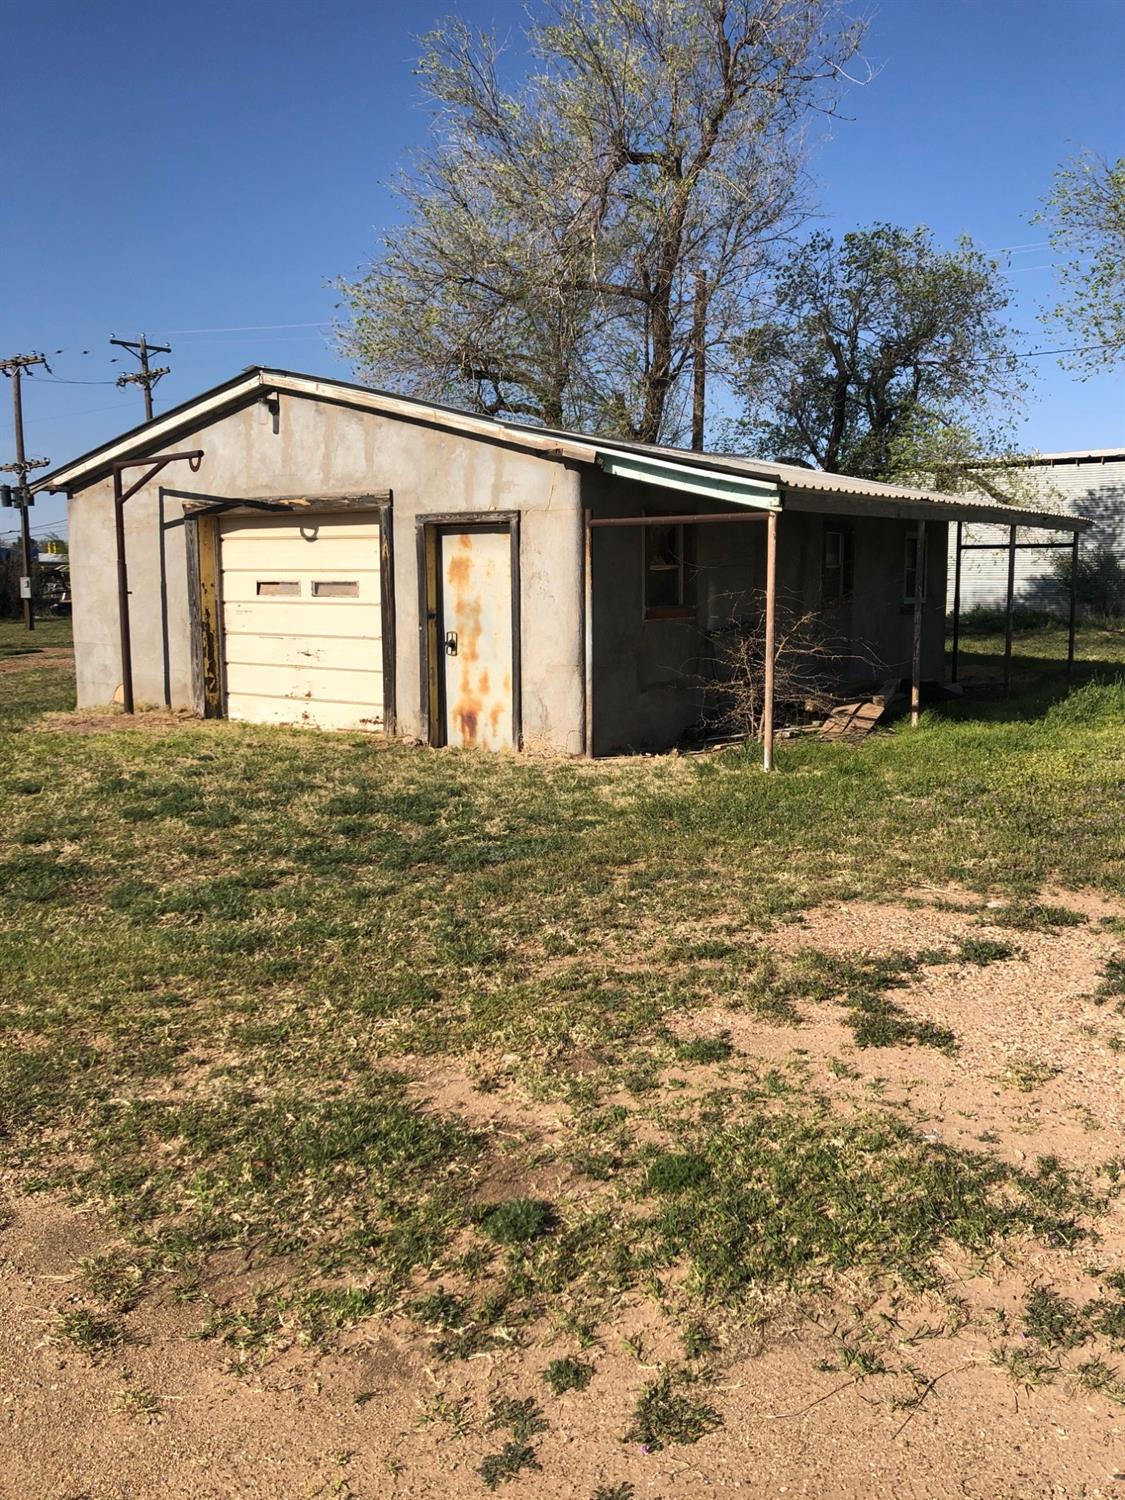 Prime Commercial location in the downtown area. 1 block South of Main St and 1 block East of Hwy. 84. The value is in the land. This property is part of an estate.